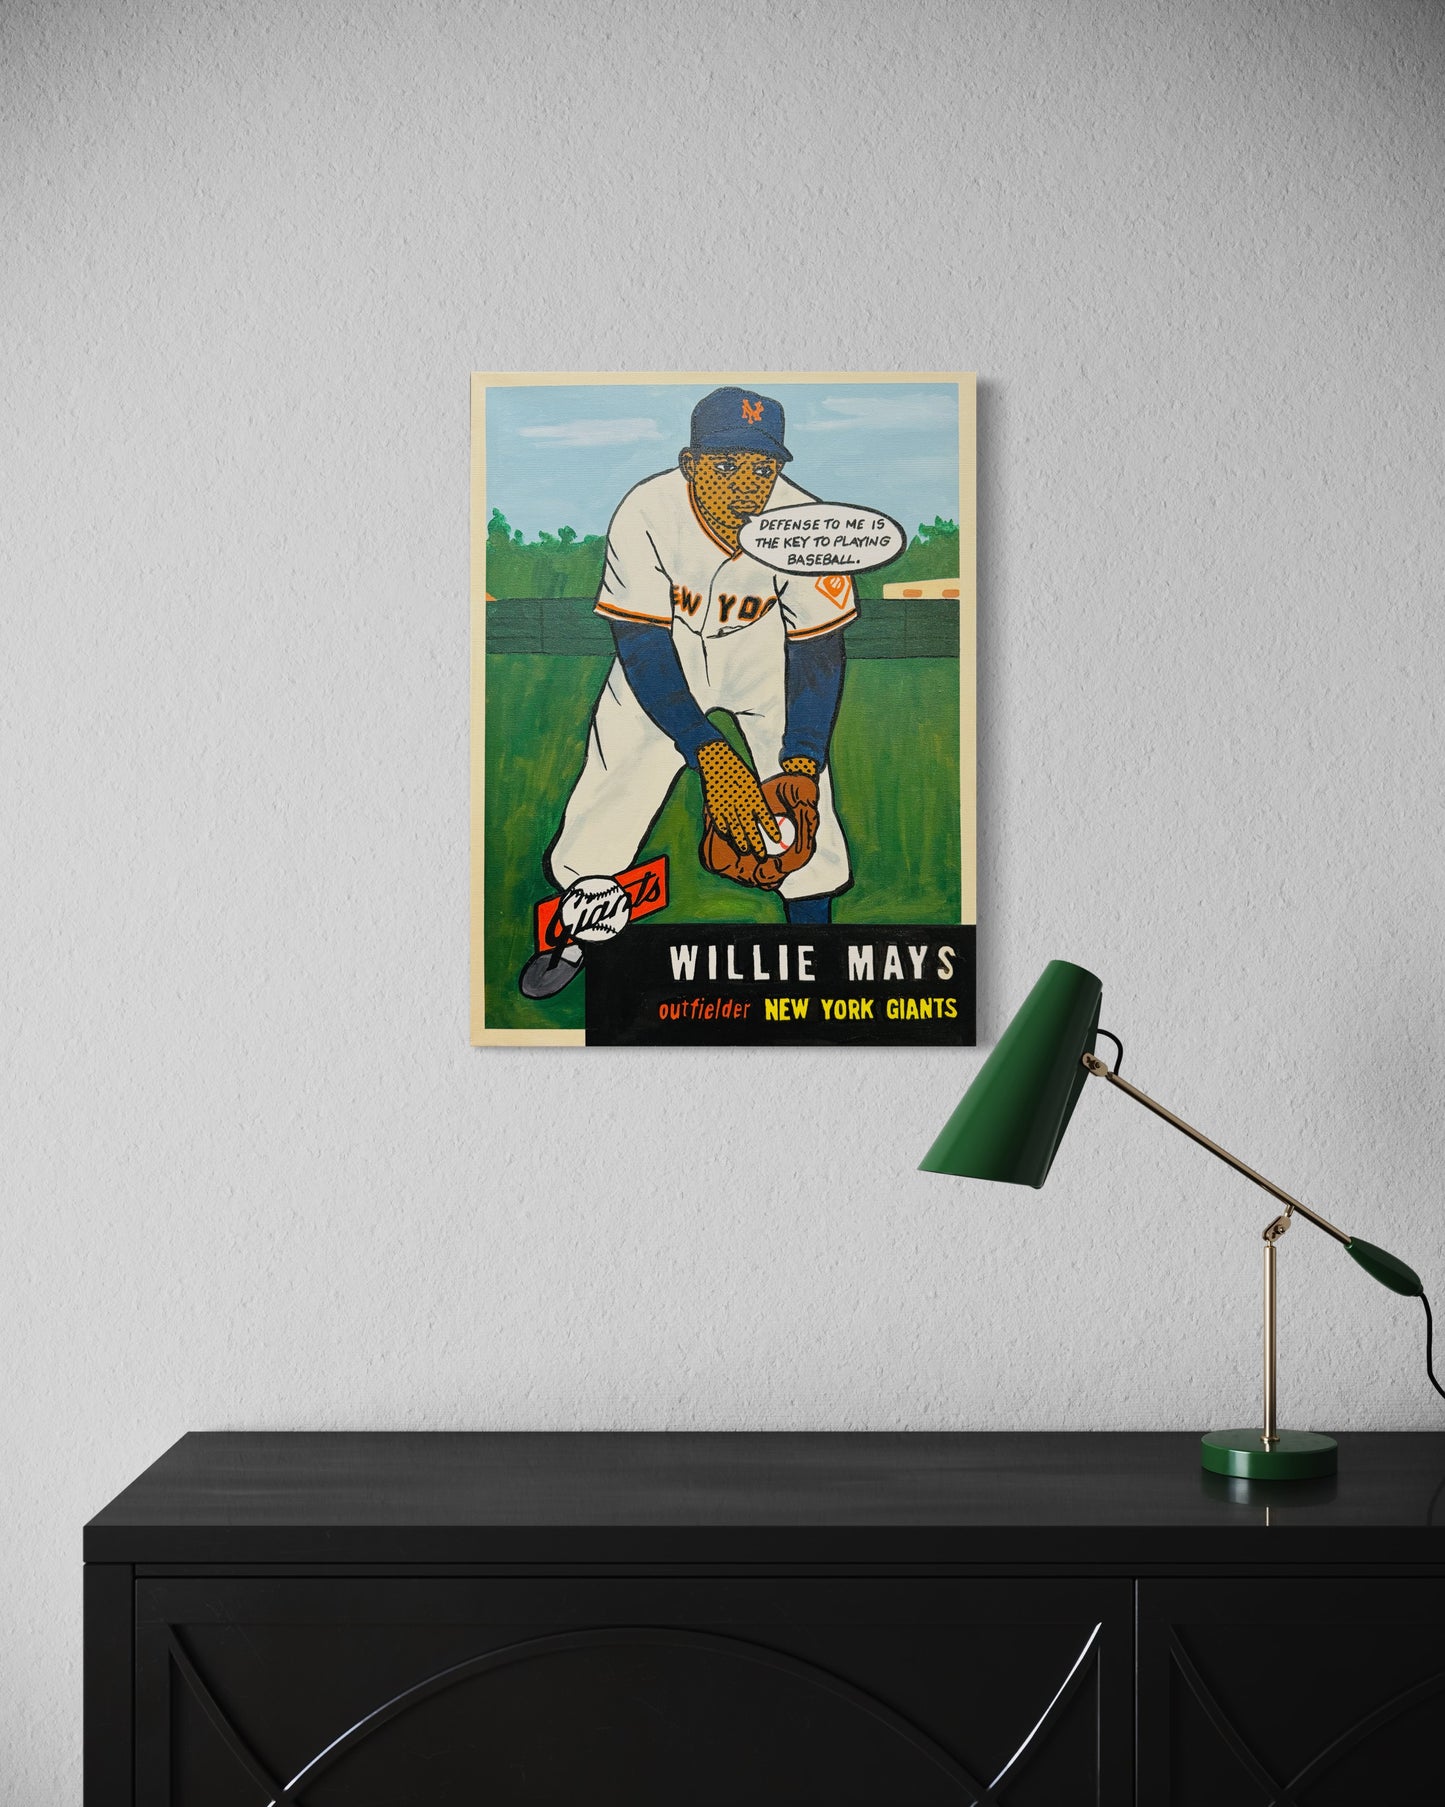 Willie Mays 1953 "Talking Cards" Series, 2024.